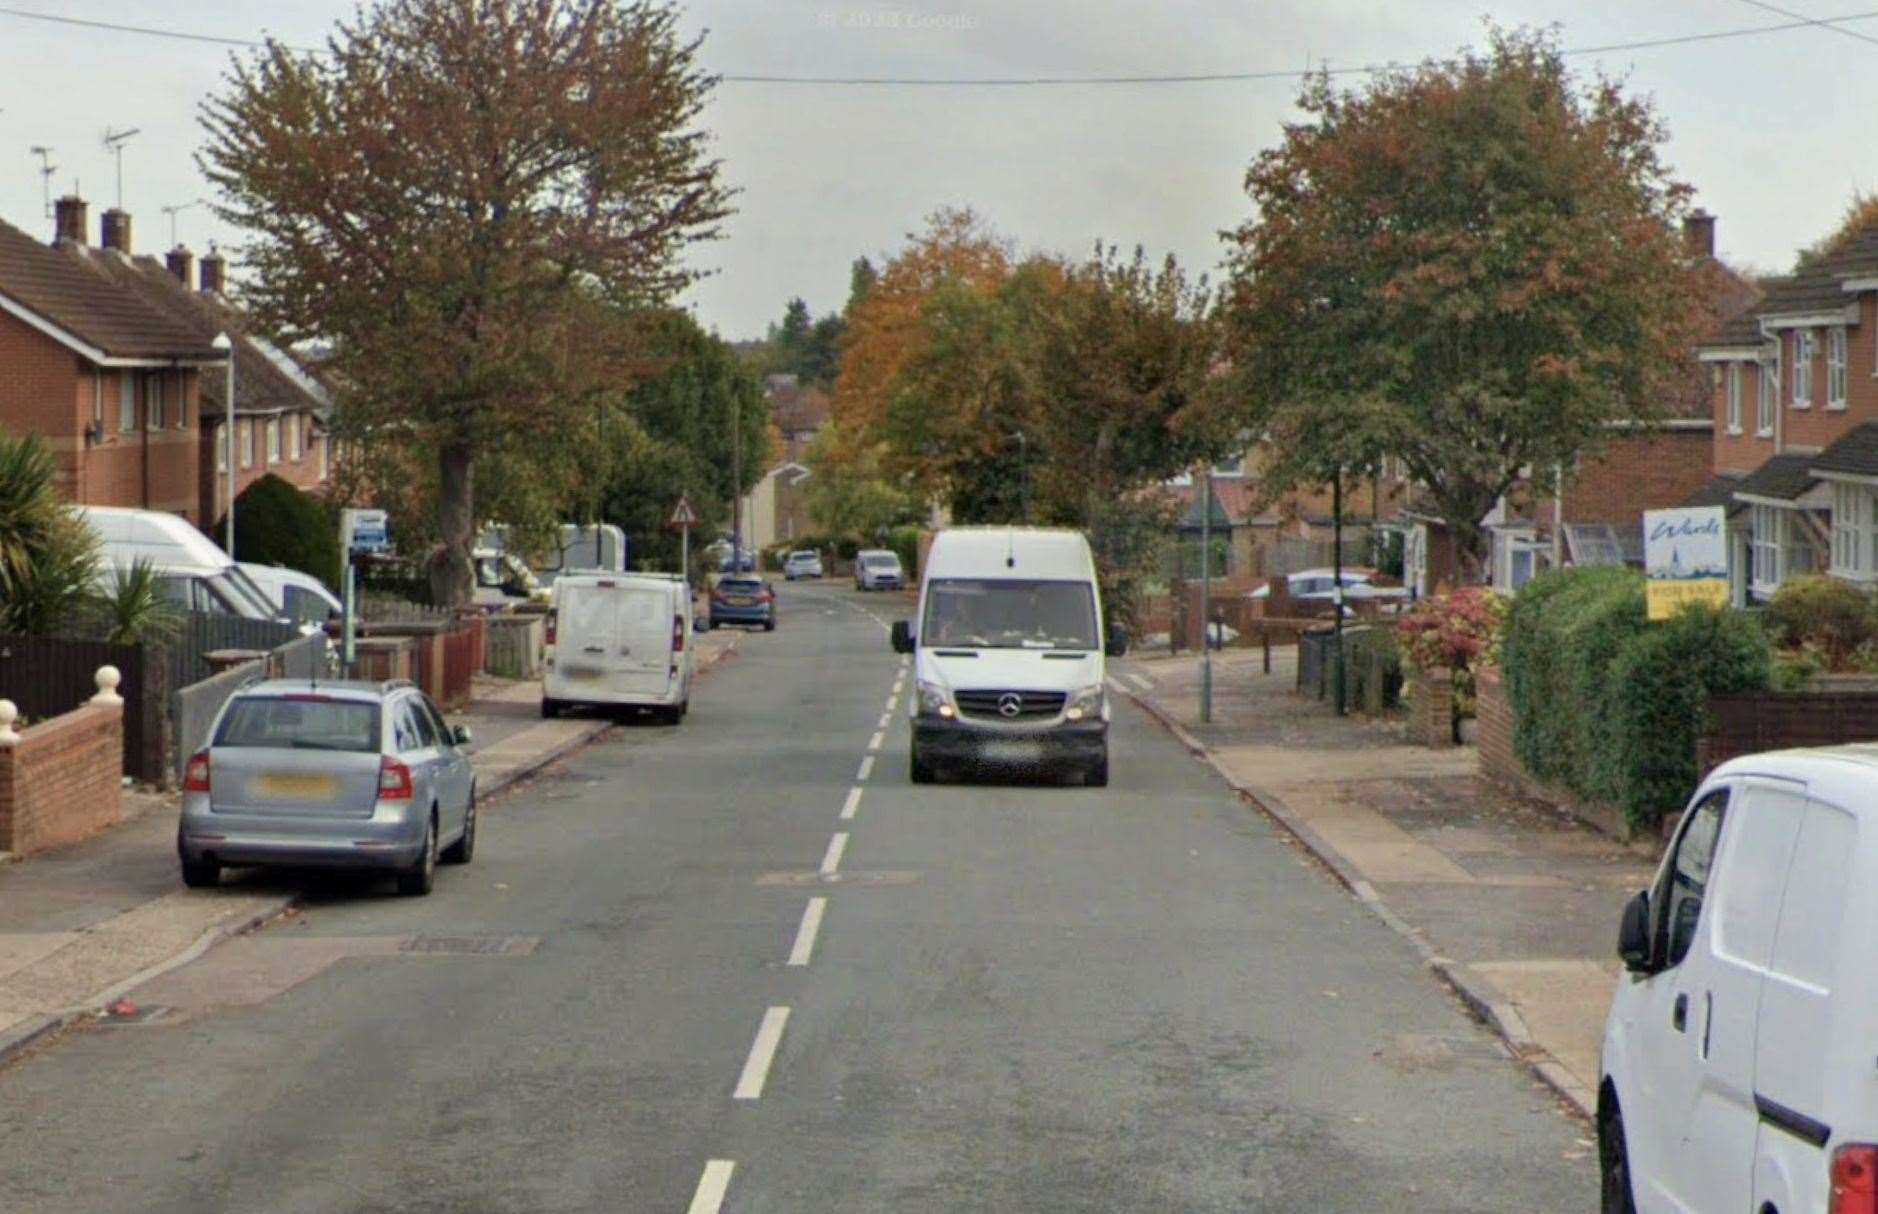 Police are searching for a man who is reported to have been seen acting indecently in Churchill Avenue, Chatham. Photo: Google Maps